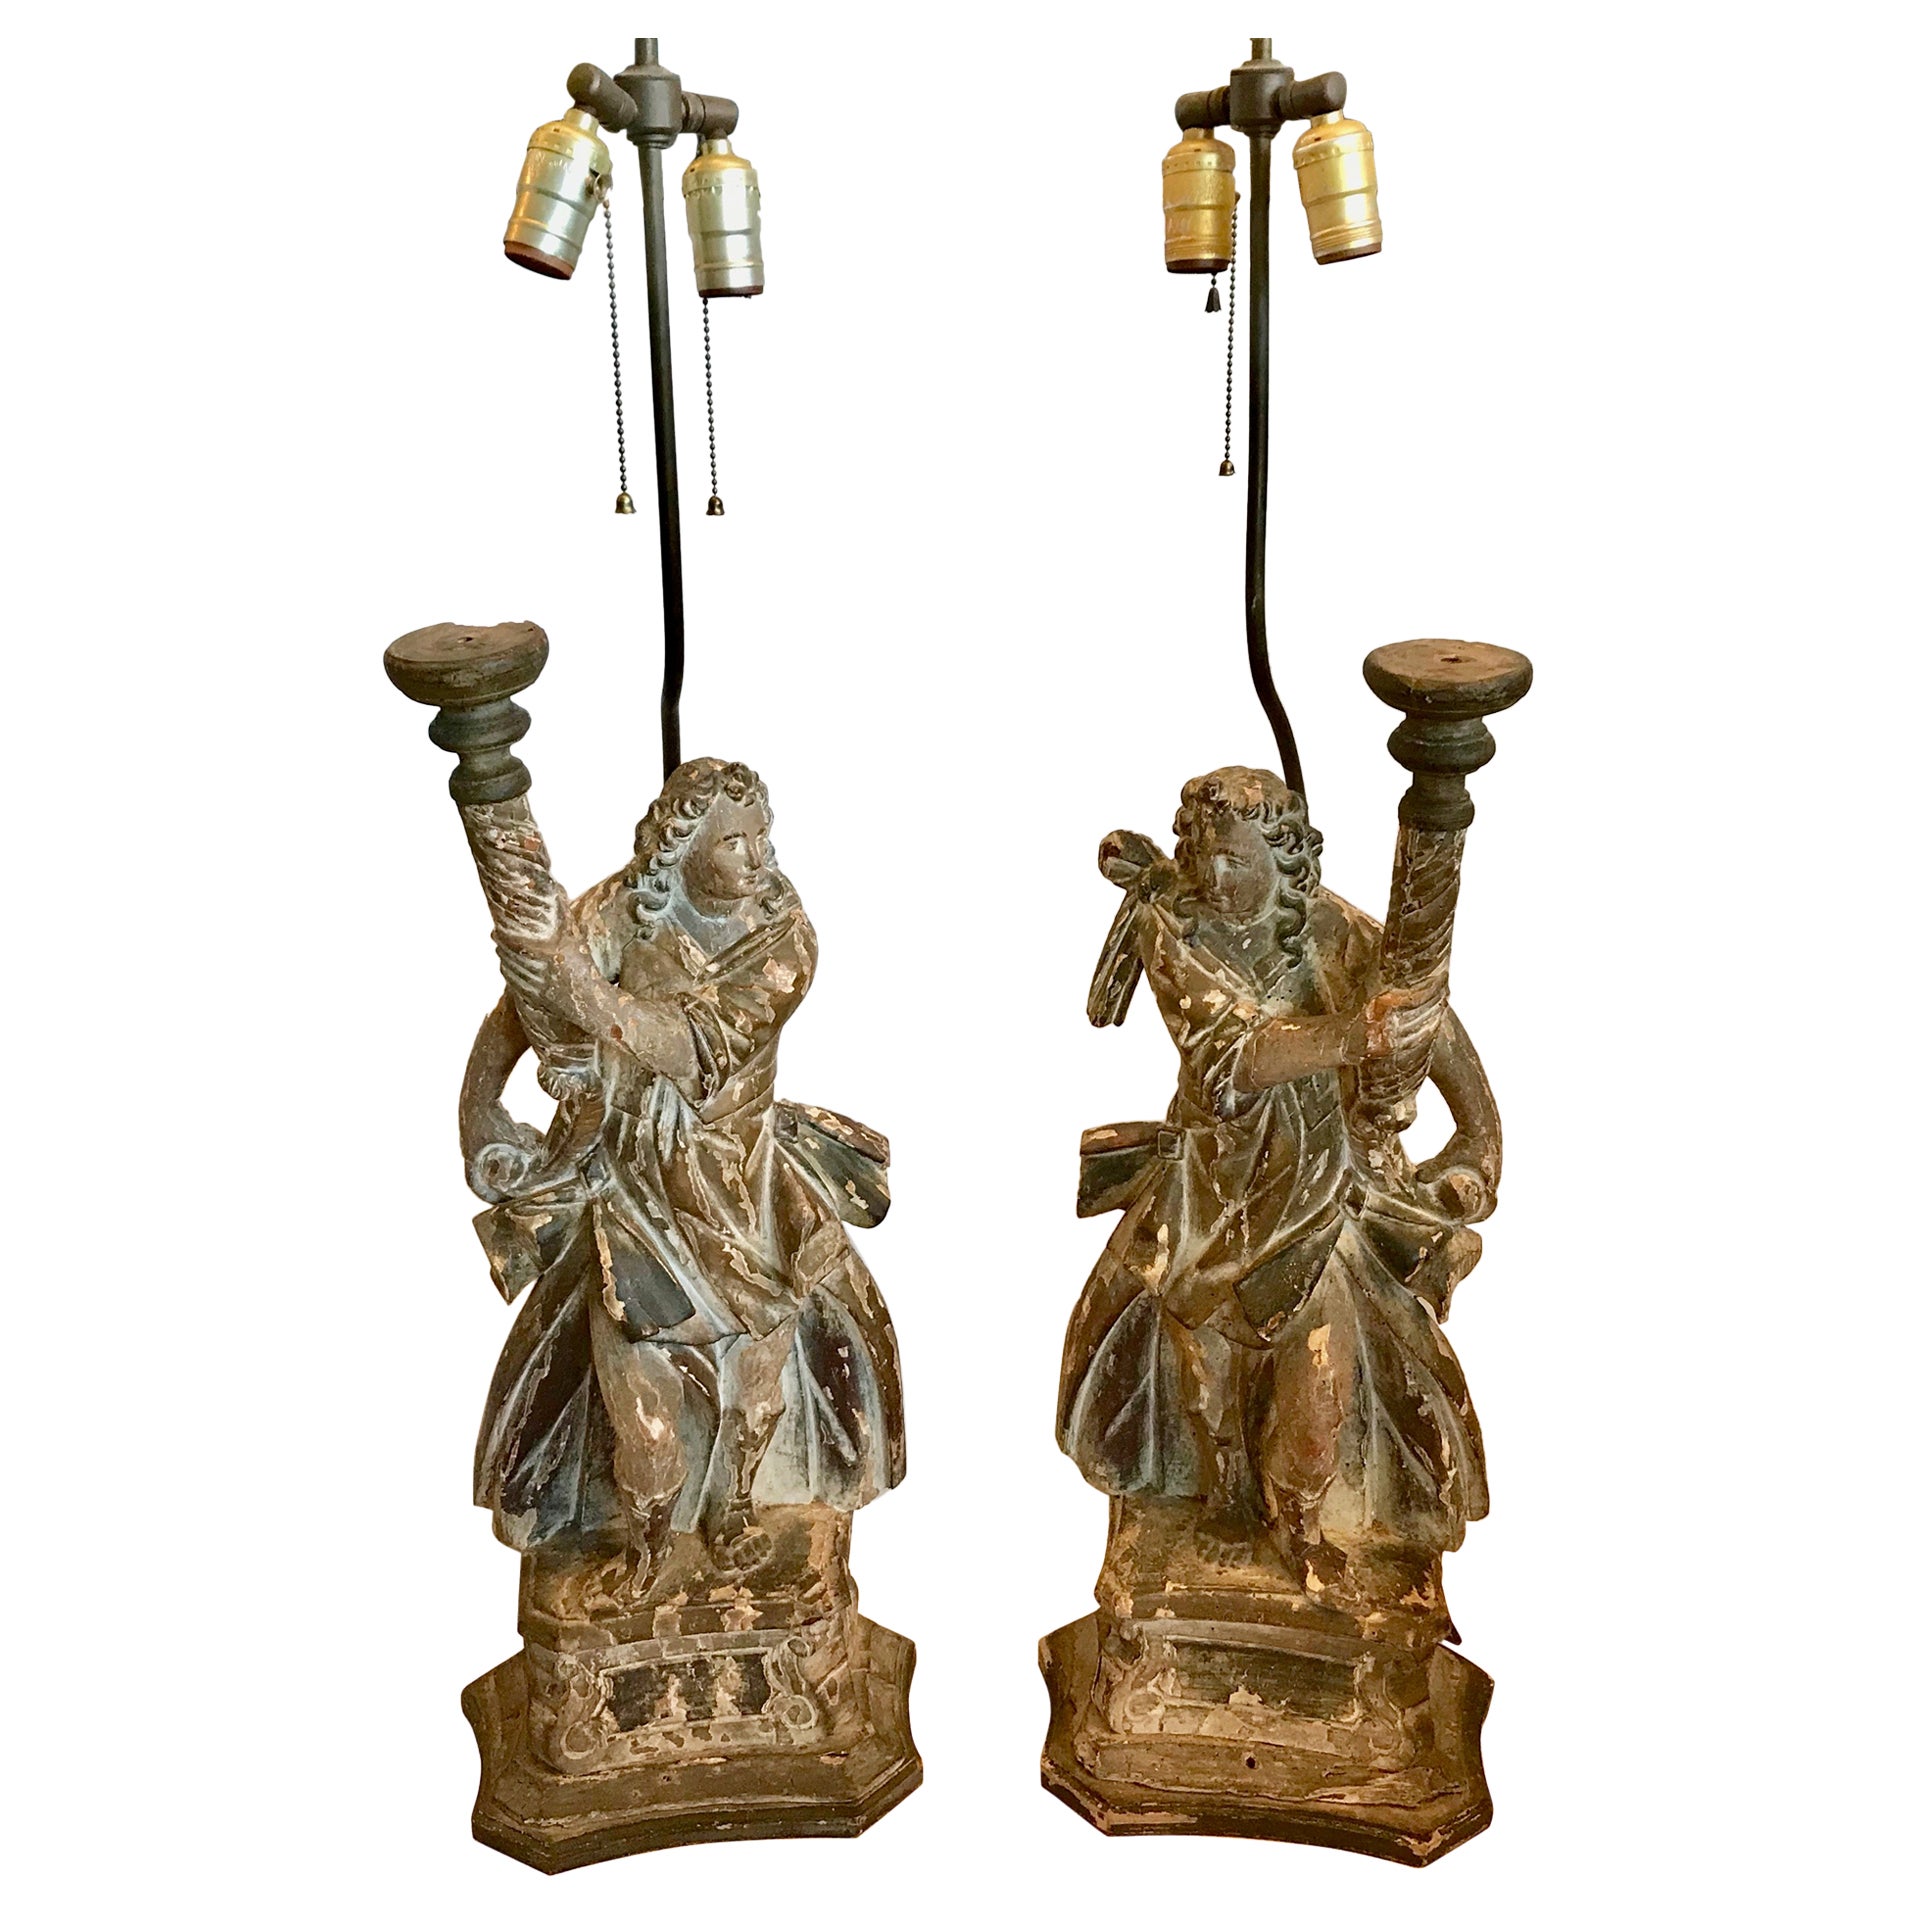 Pair Of 17TH Century Italian Figural Prickets Now Mounted As Lamps